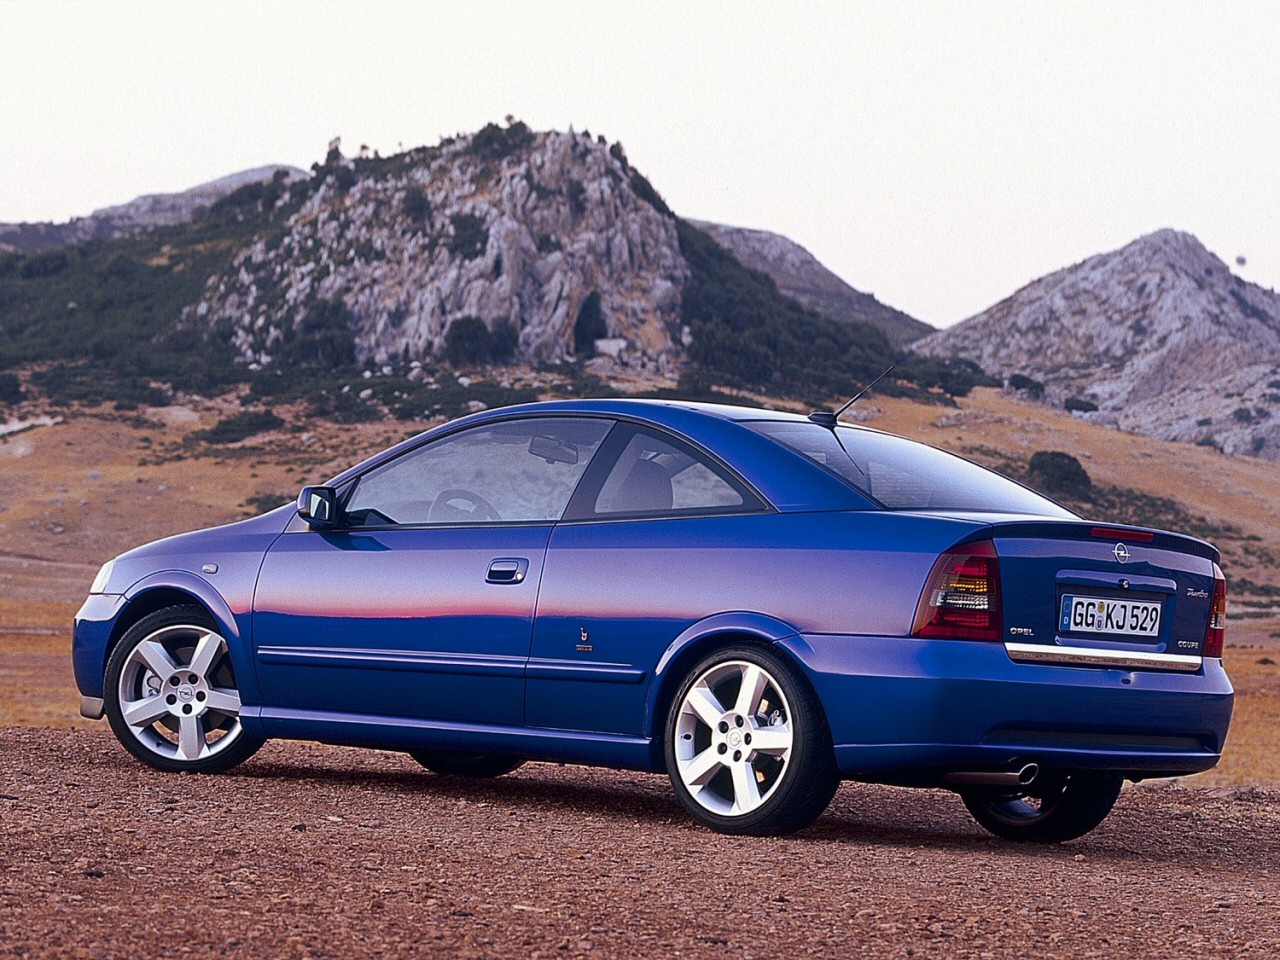 More information about "OPEL ASTRA COUPÉ (2000-2004)"